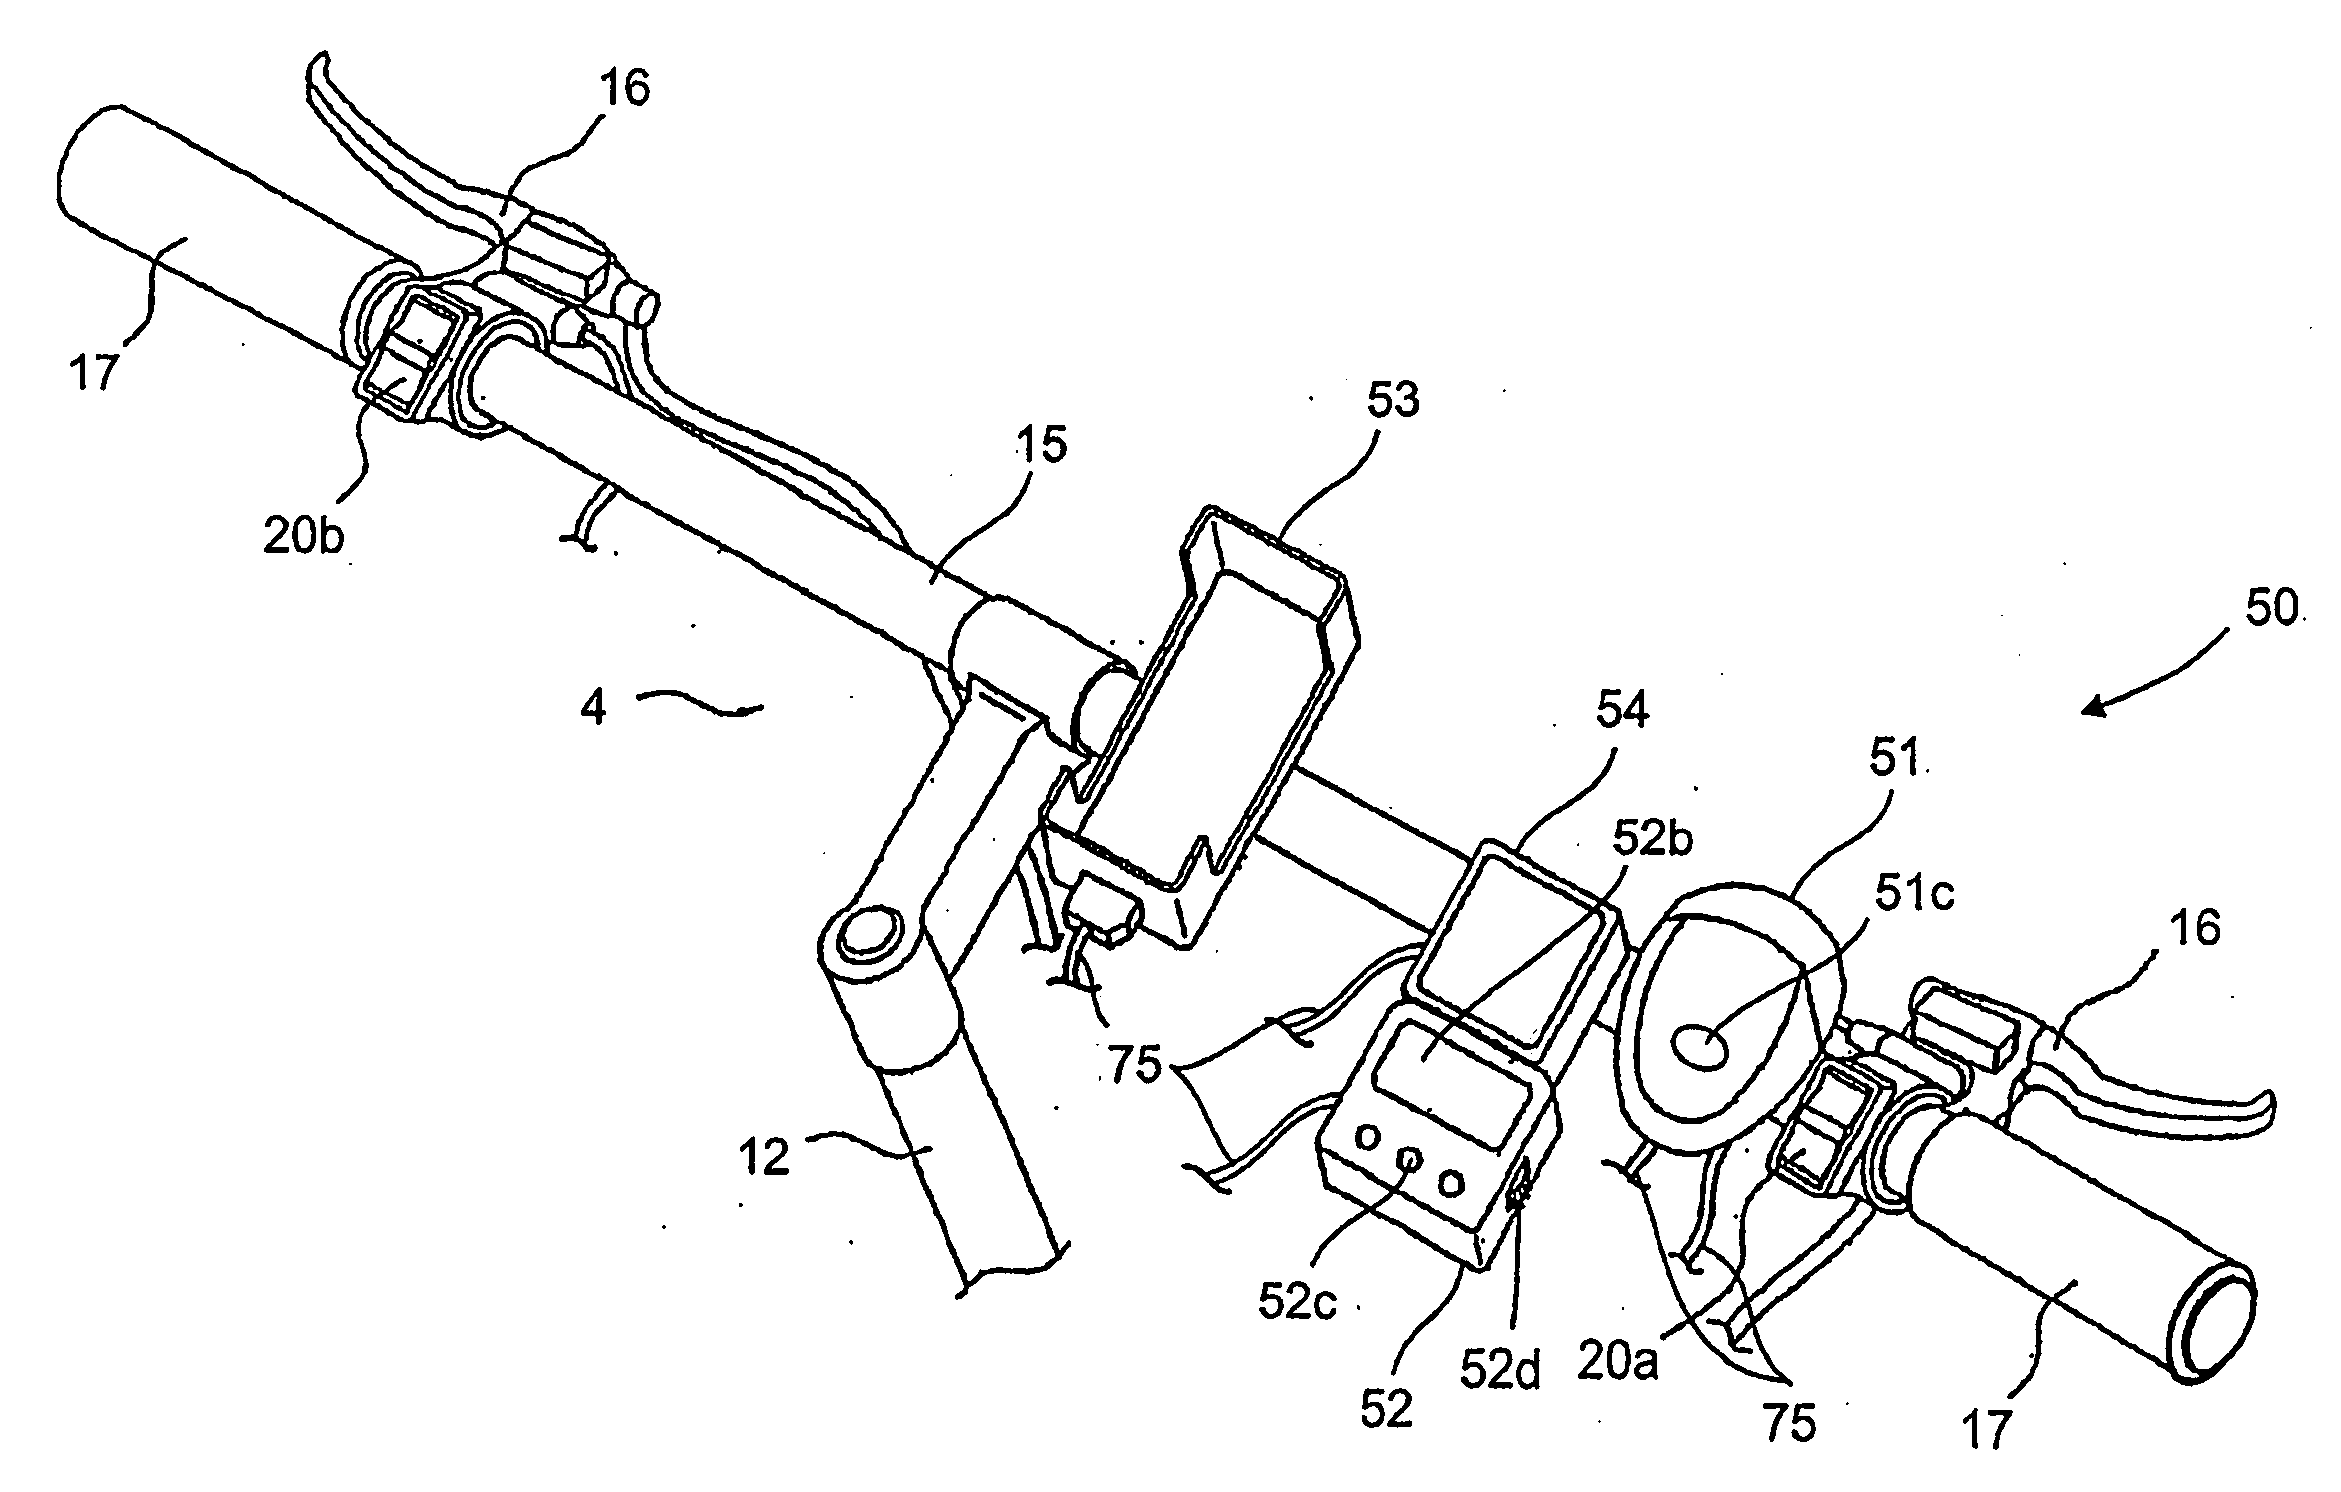 Bicycle light assembly with auxiliary output connector